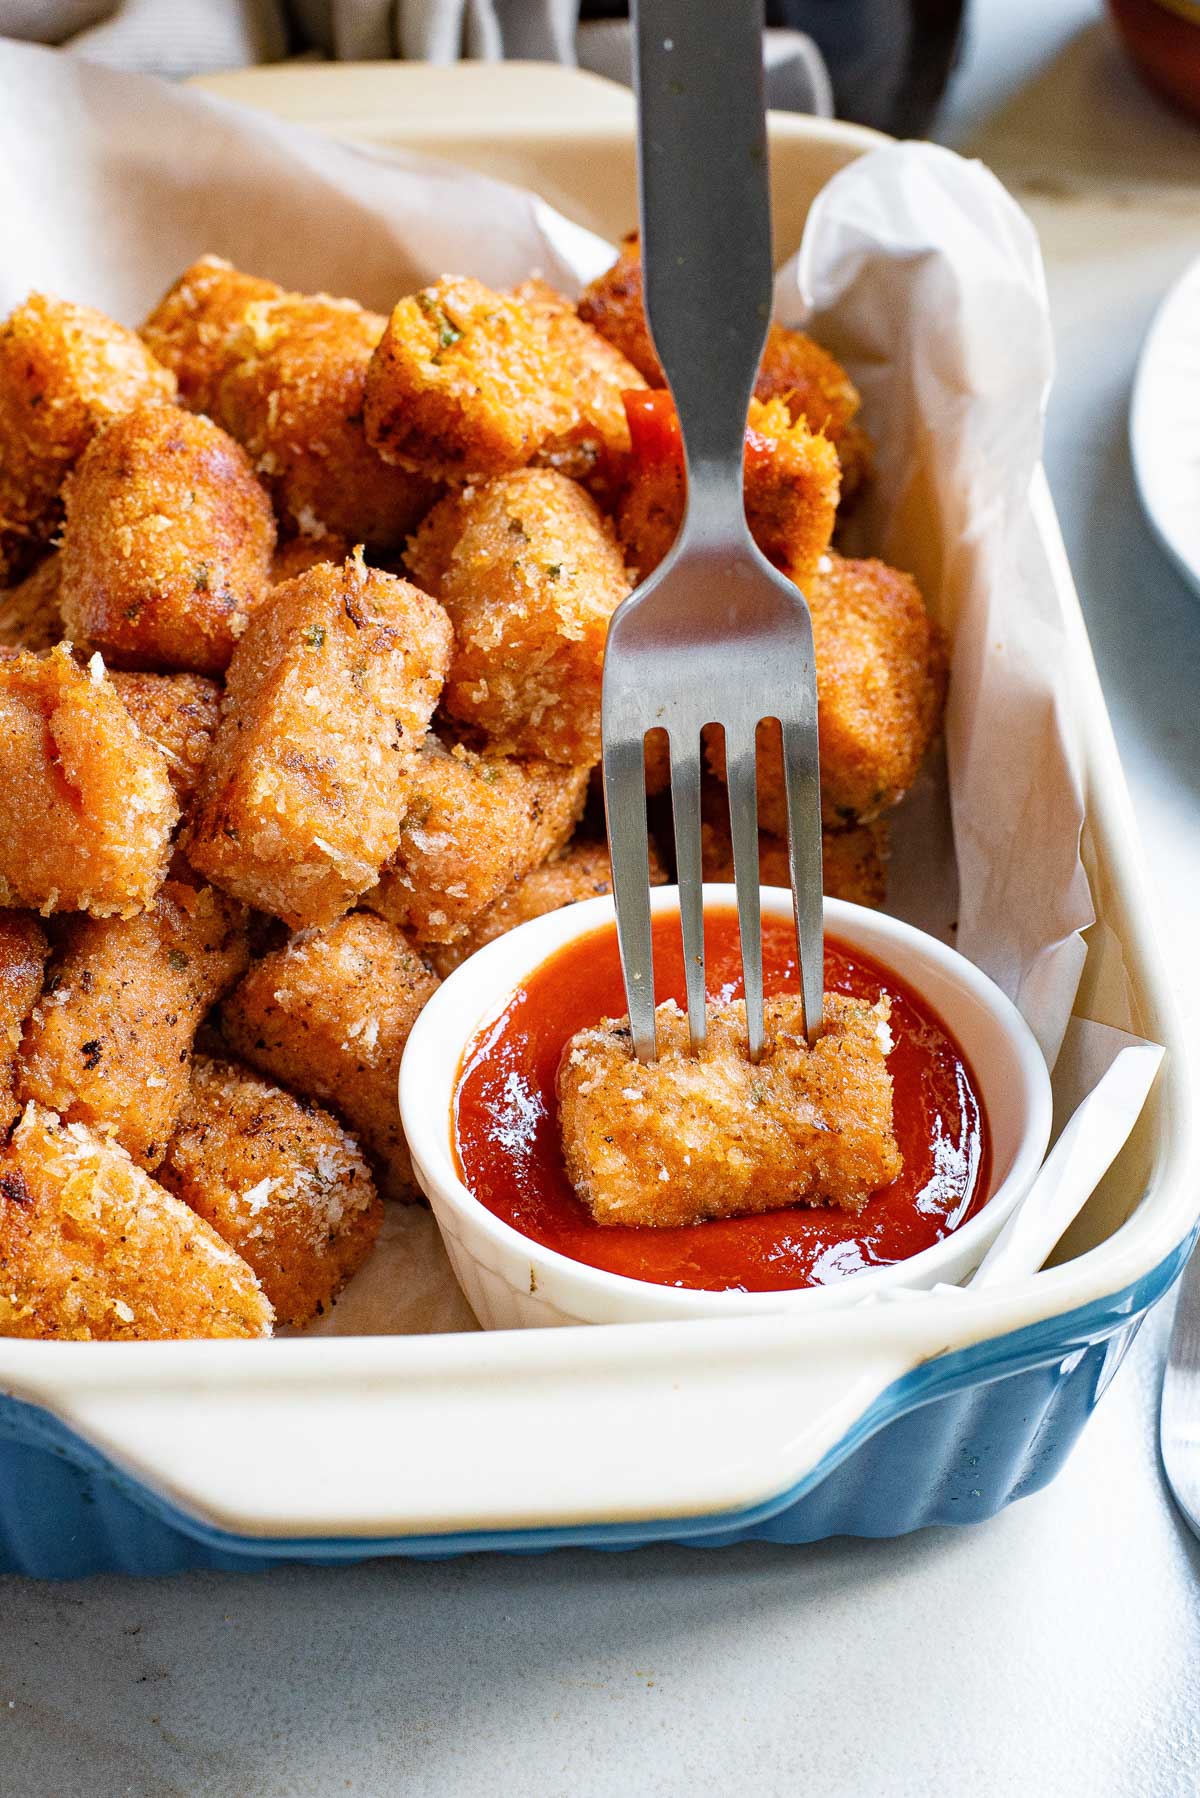 a fork dipping one of the sweet potato tater tots into ketchup